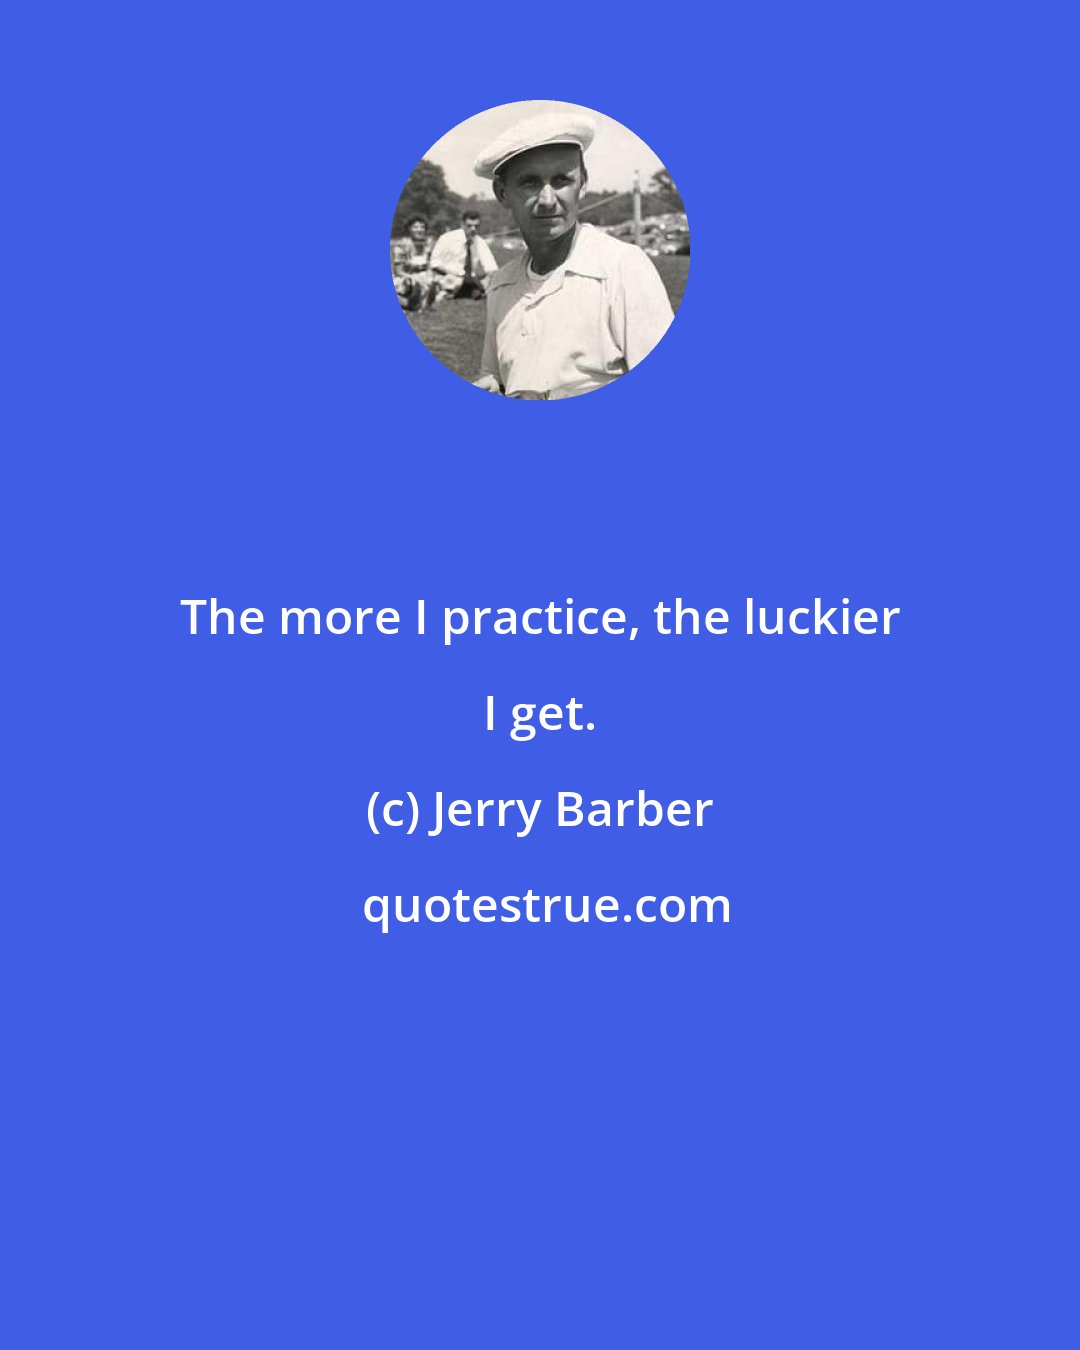 Jerry Barber: The more I practice, the luckier I get.